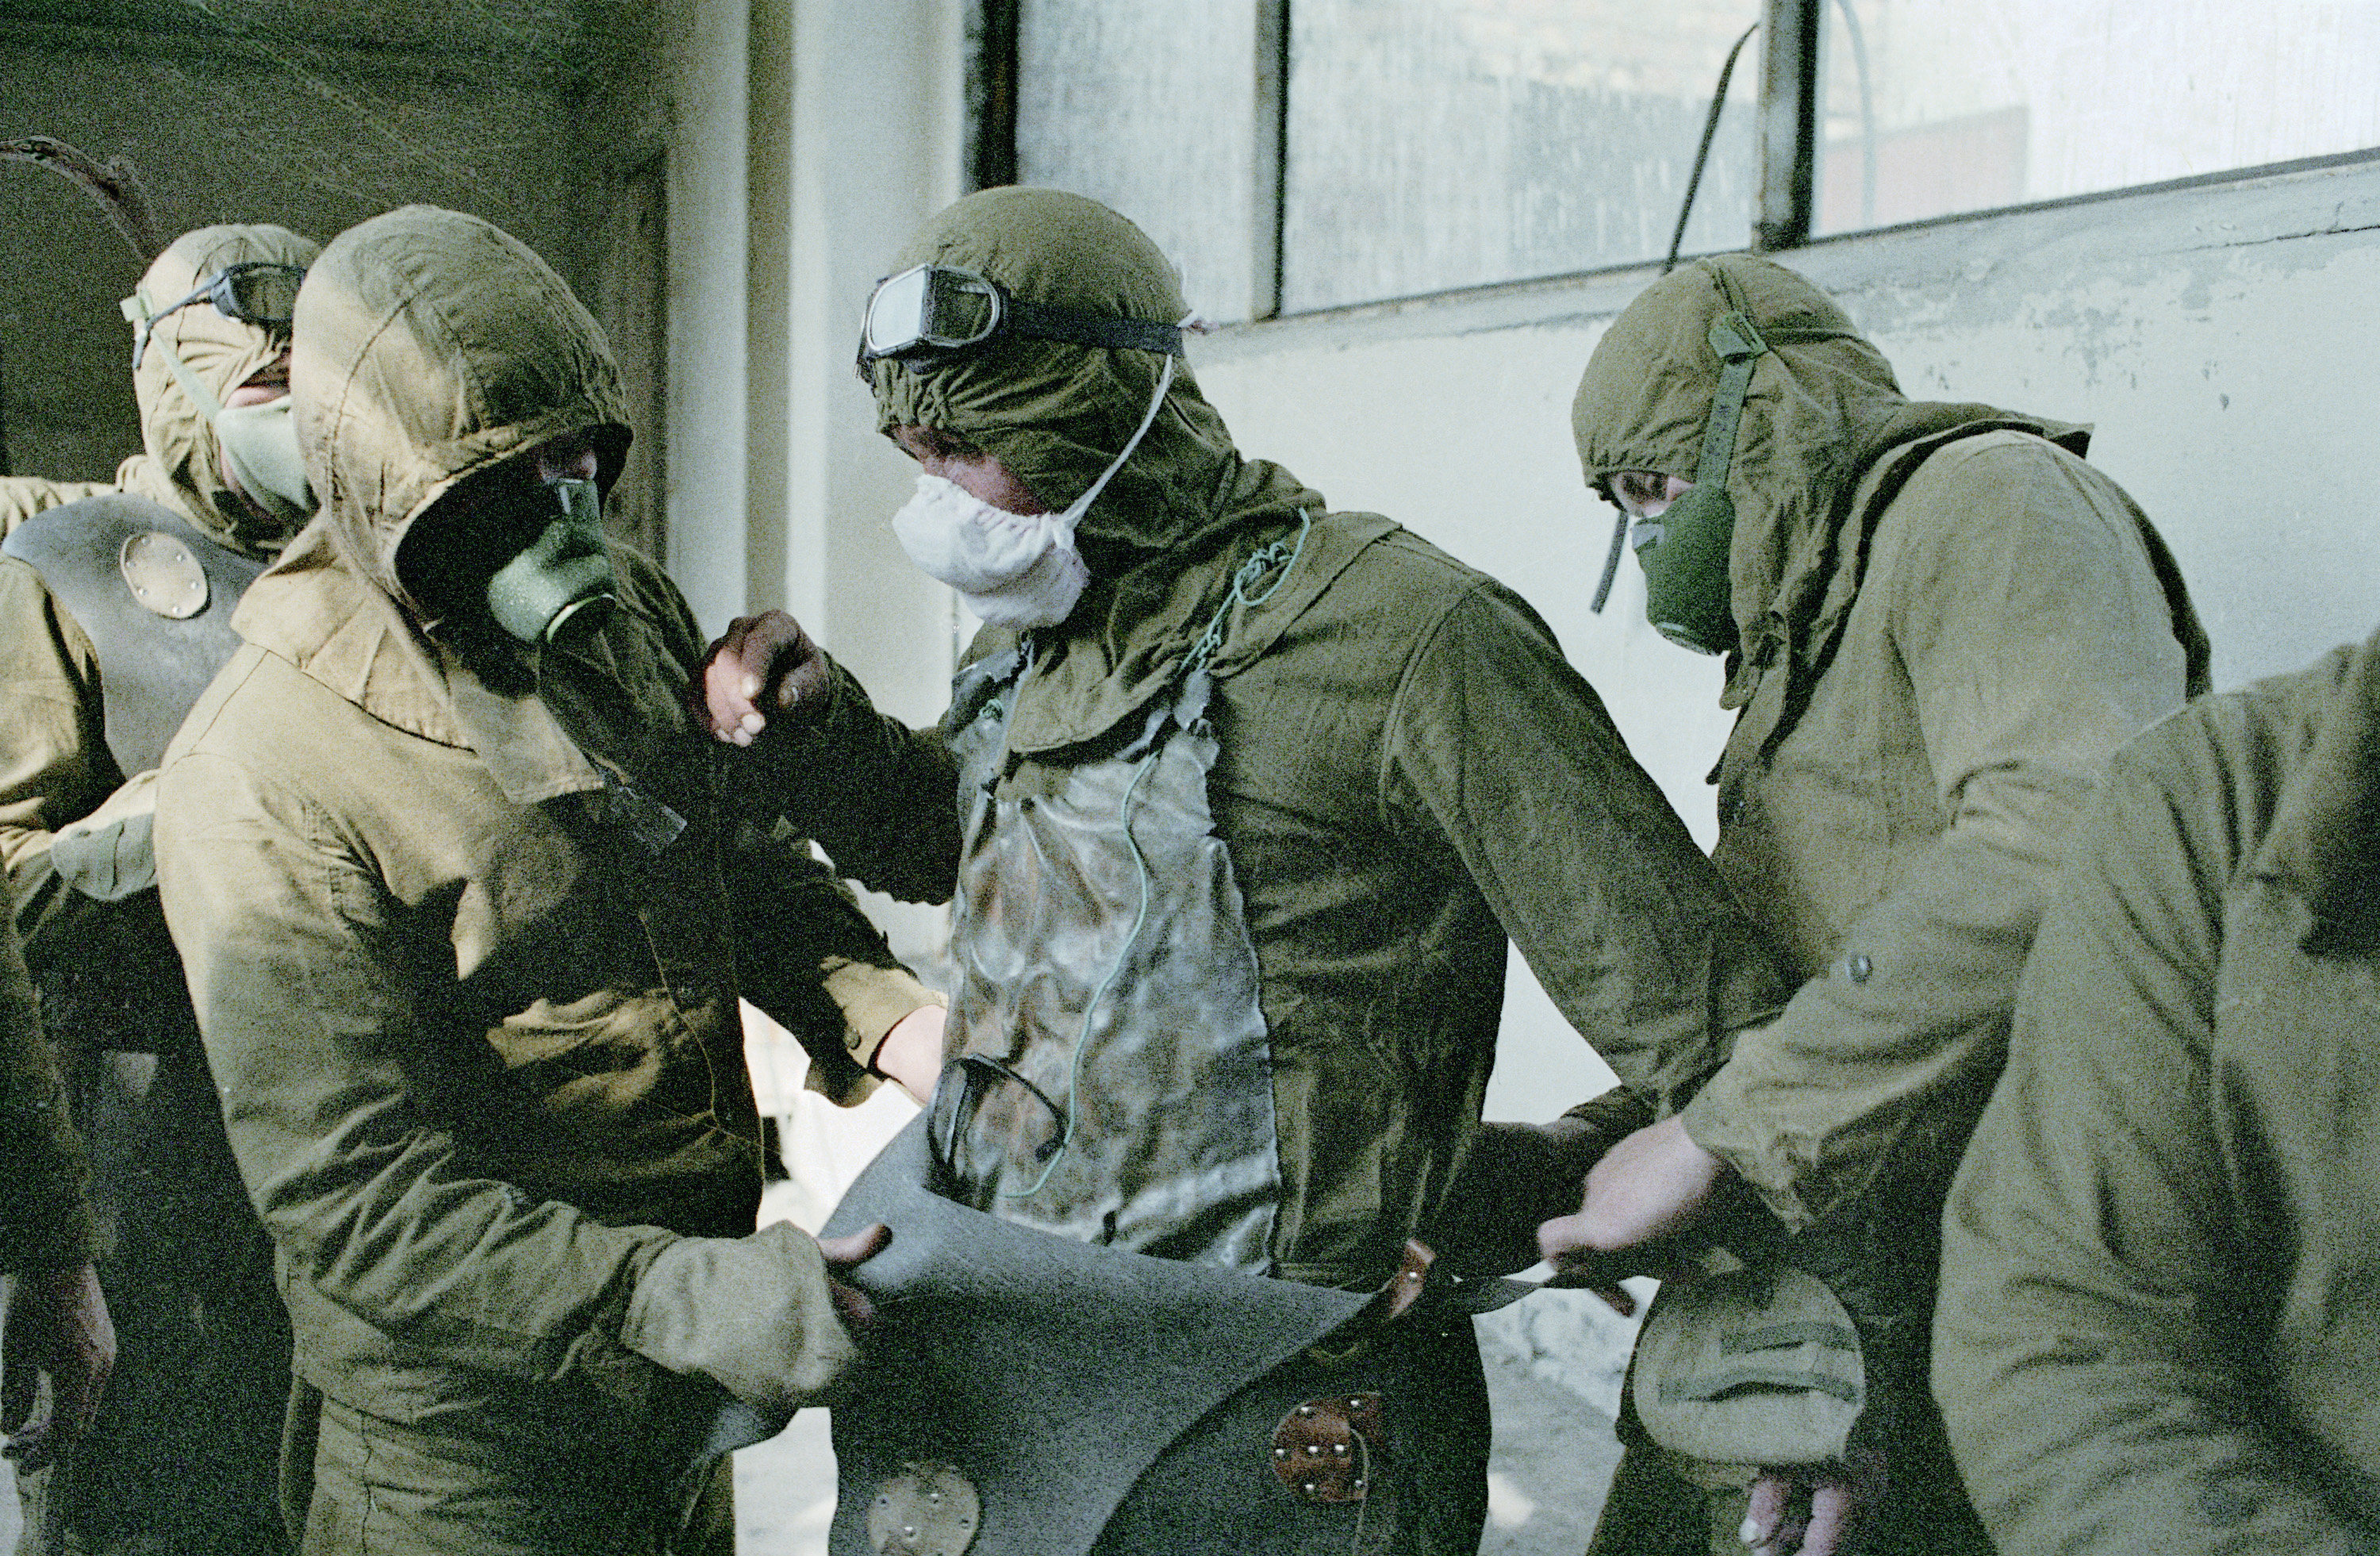 Chernobyl. After the accident